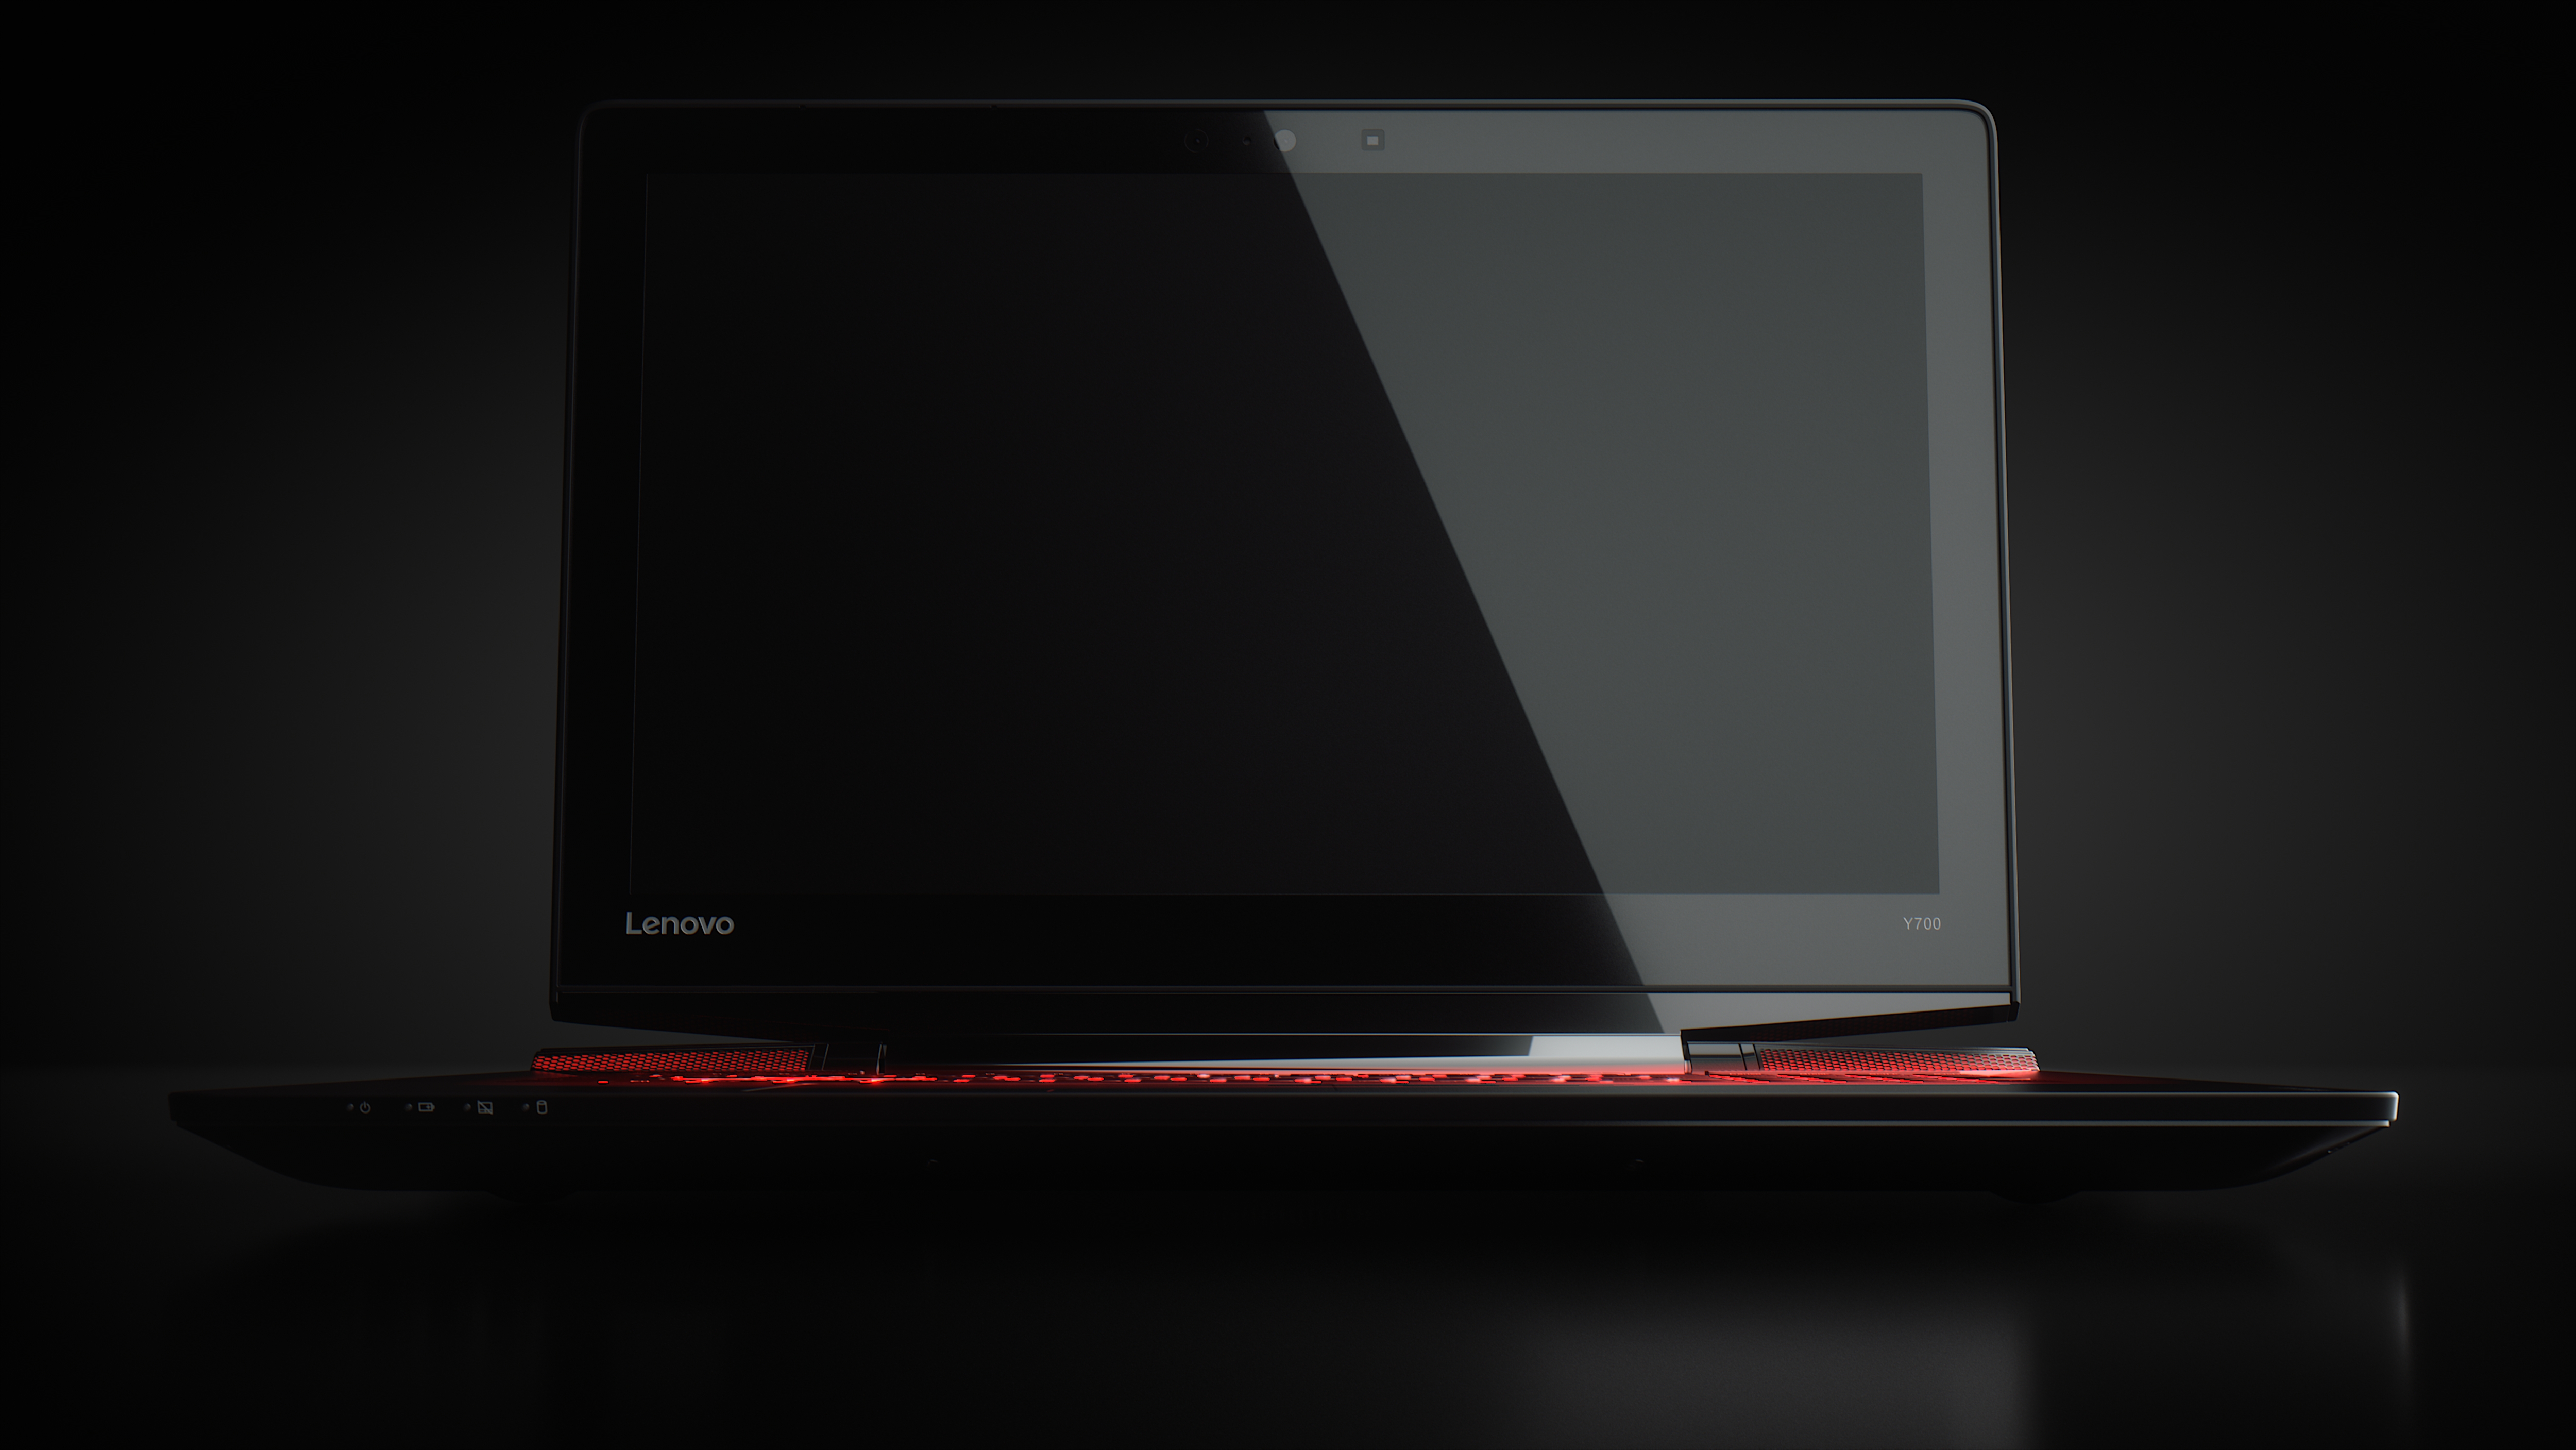 Lenovo Launches Ideapad Y700 Touch